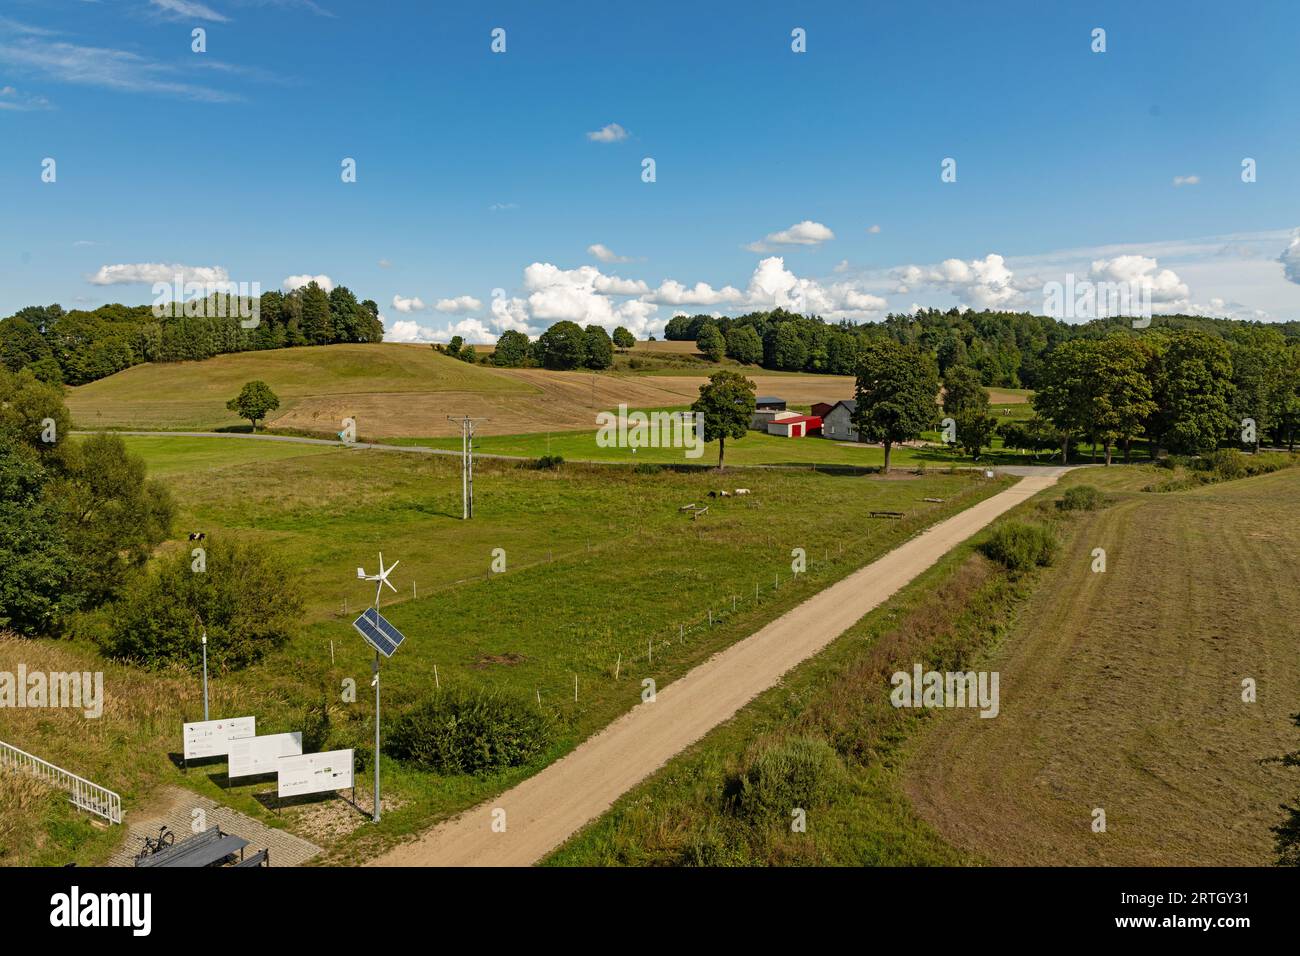 view from historic railway viaduct over the masurian landscape near Glaznoty in Poland Stock Photo